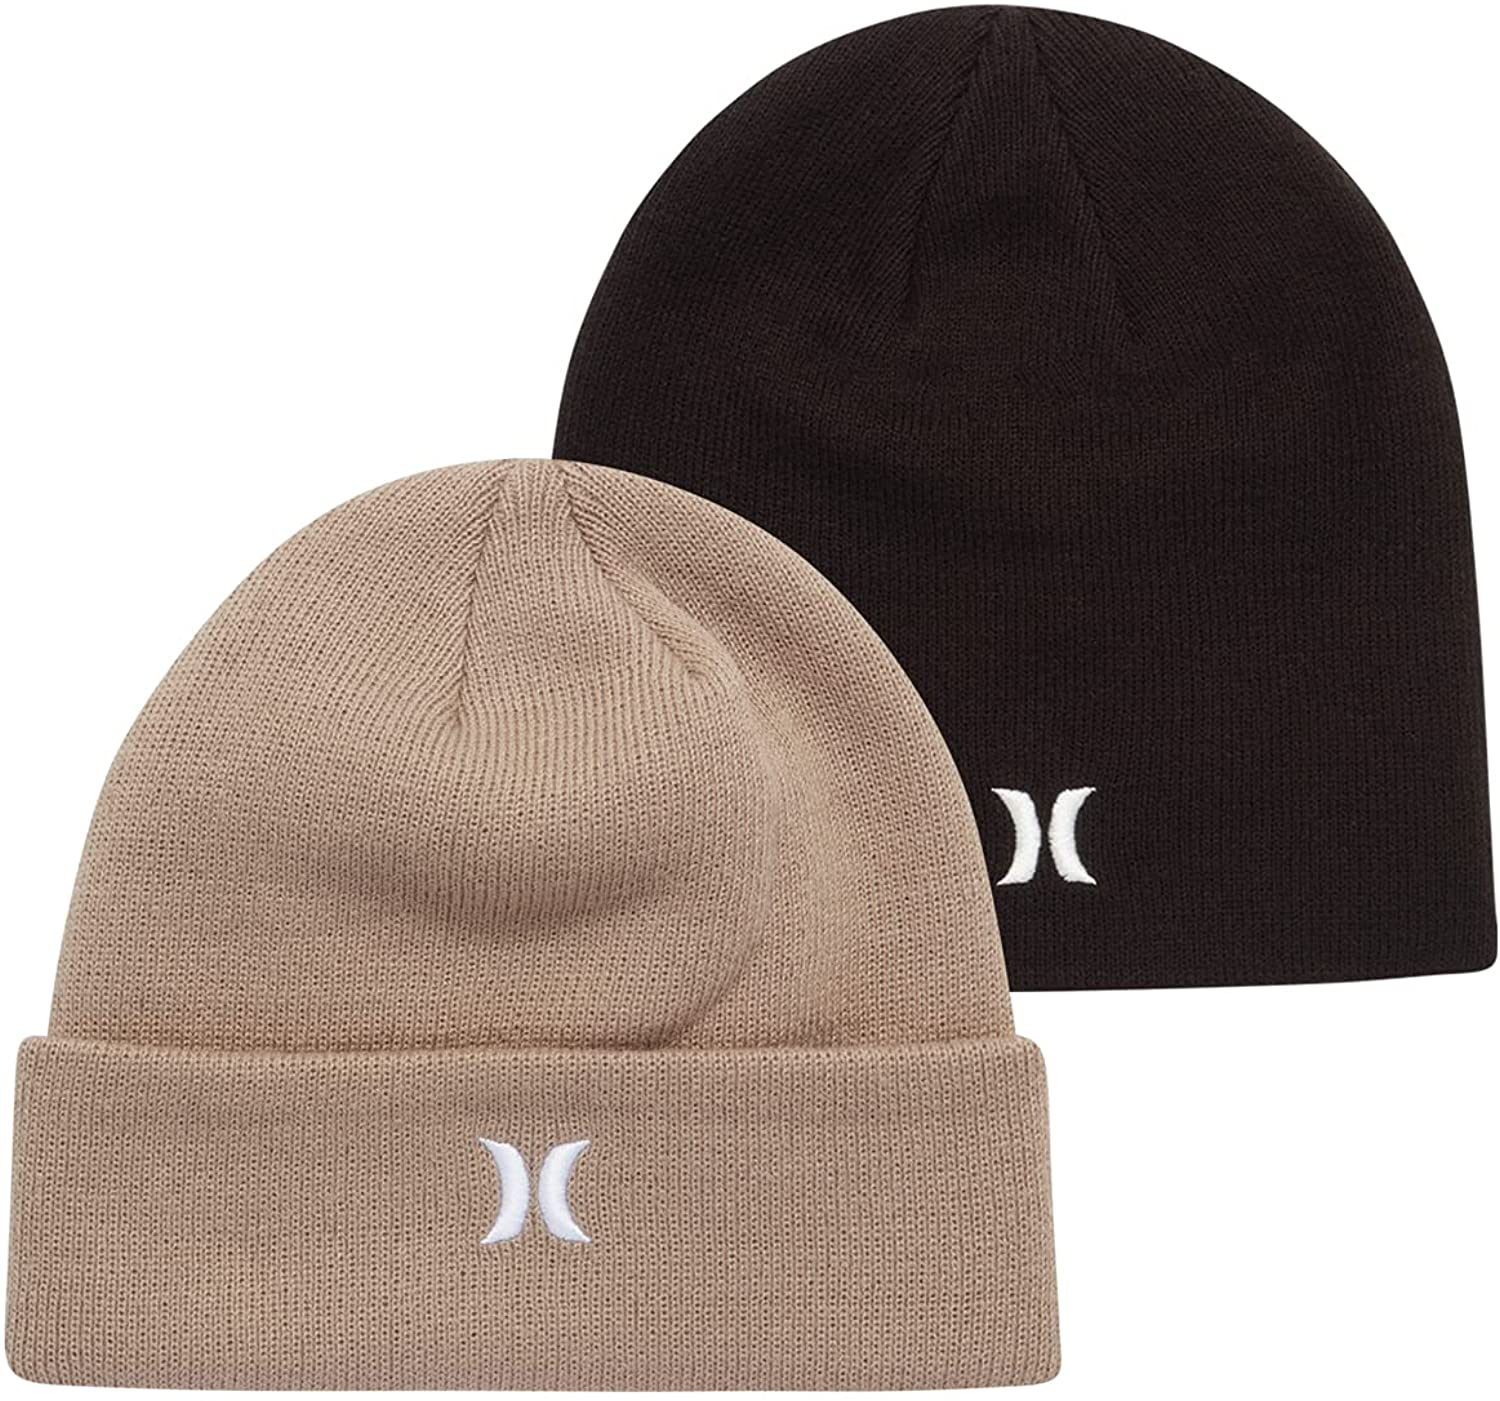 Hurley Black Icon Classic and Khaki Icon Cuffed Men's Beanie (2 Pack)